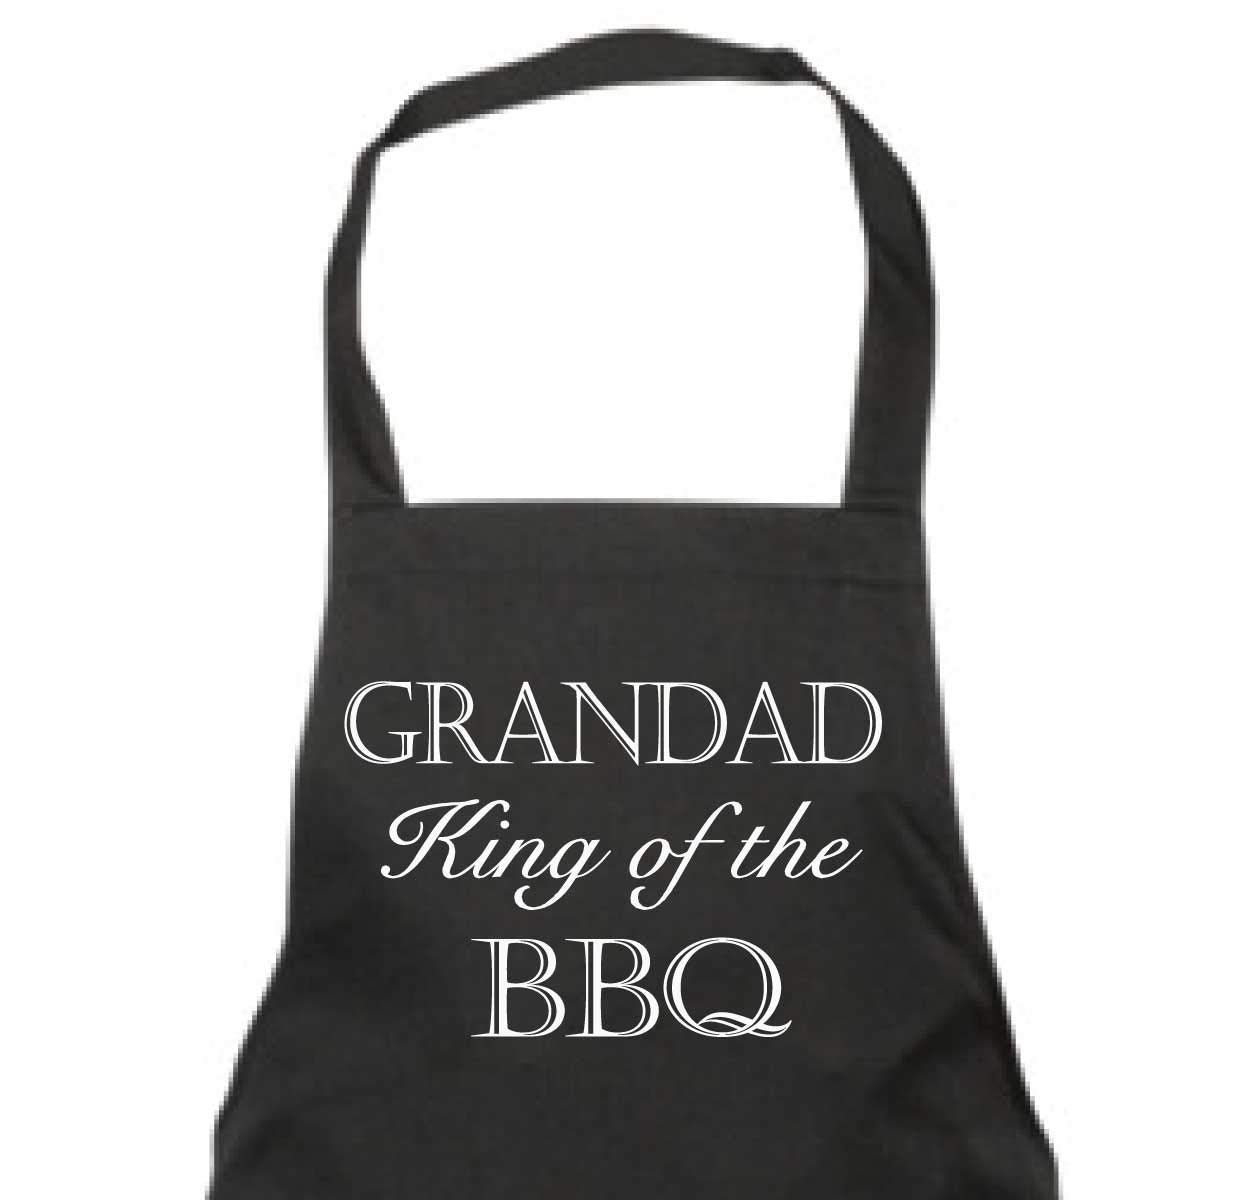 Grandad King of The BBQ Apron Gift Present Fathers Day Birthday Christmas